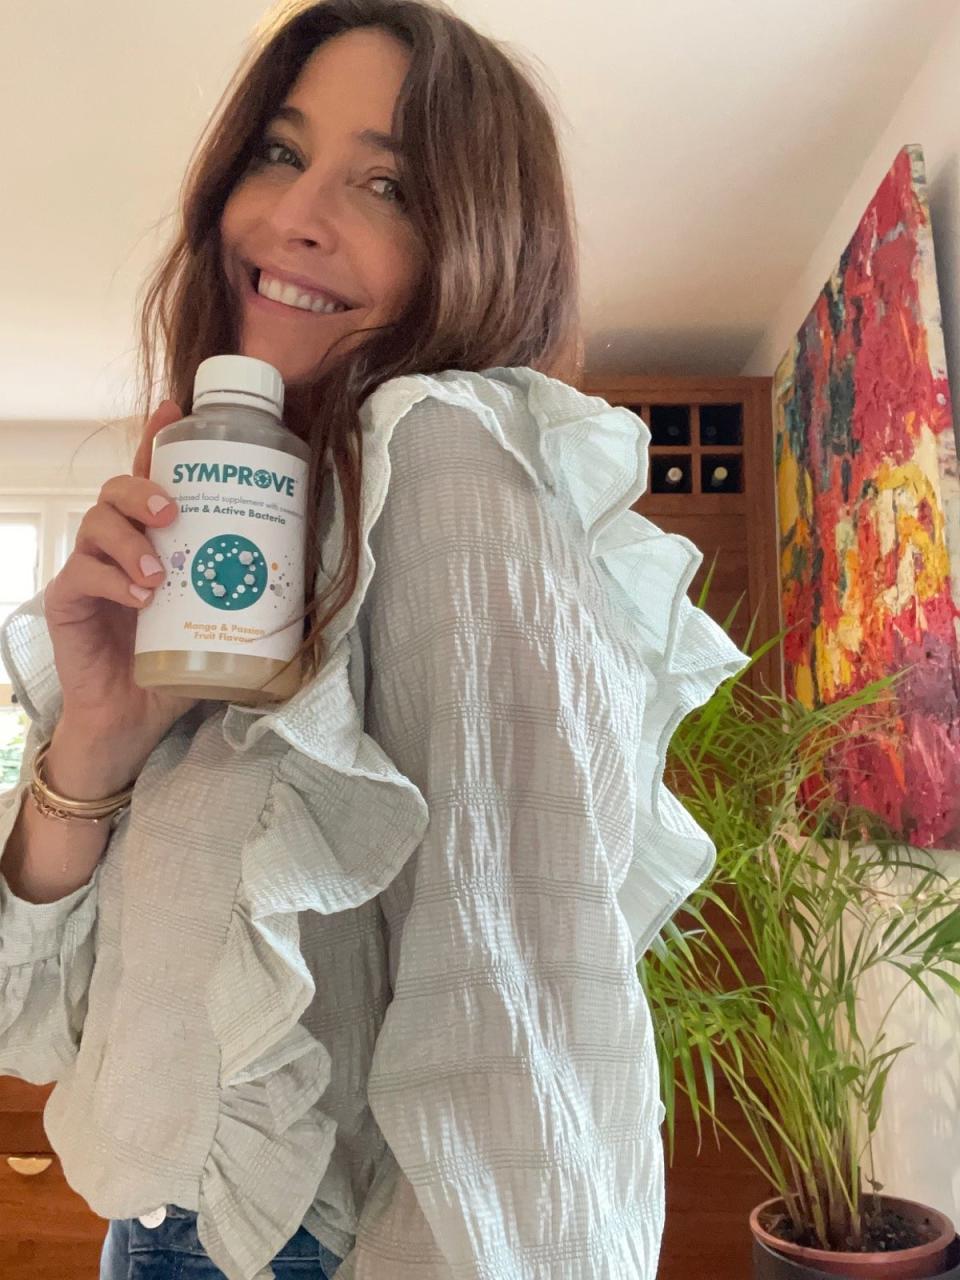 Lisa Snowdon has teamed up with probiotic brand Symprove for their #ItTakesGuts campaign (Handout)